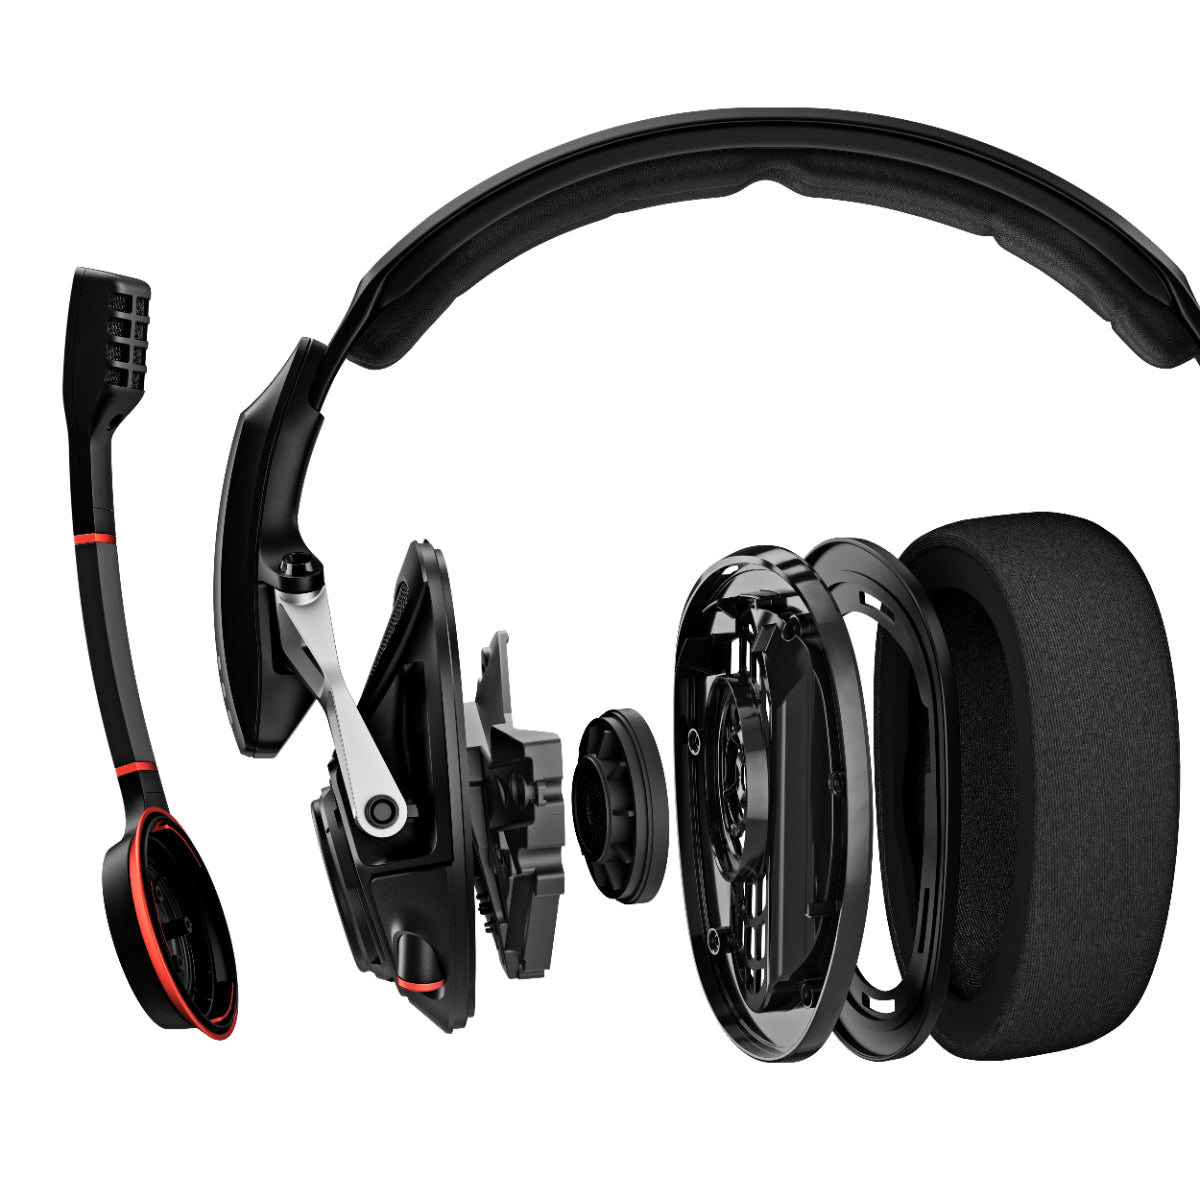 EPOS GSP500 Open Acoustic Gaming Headset